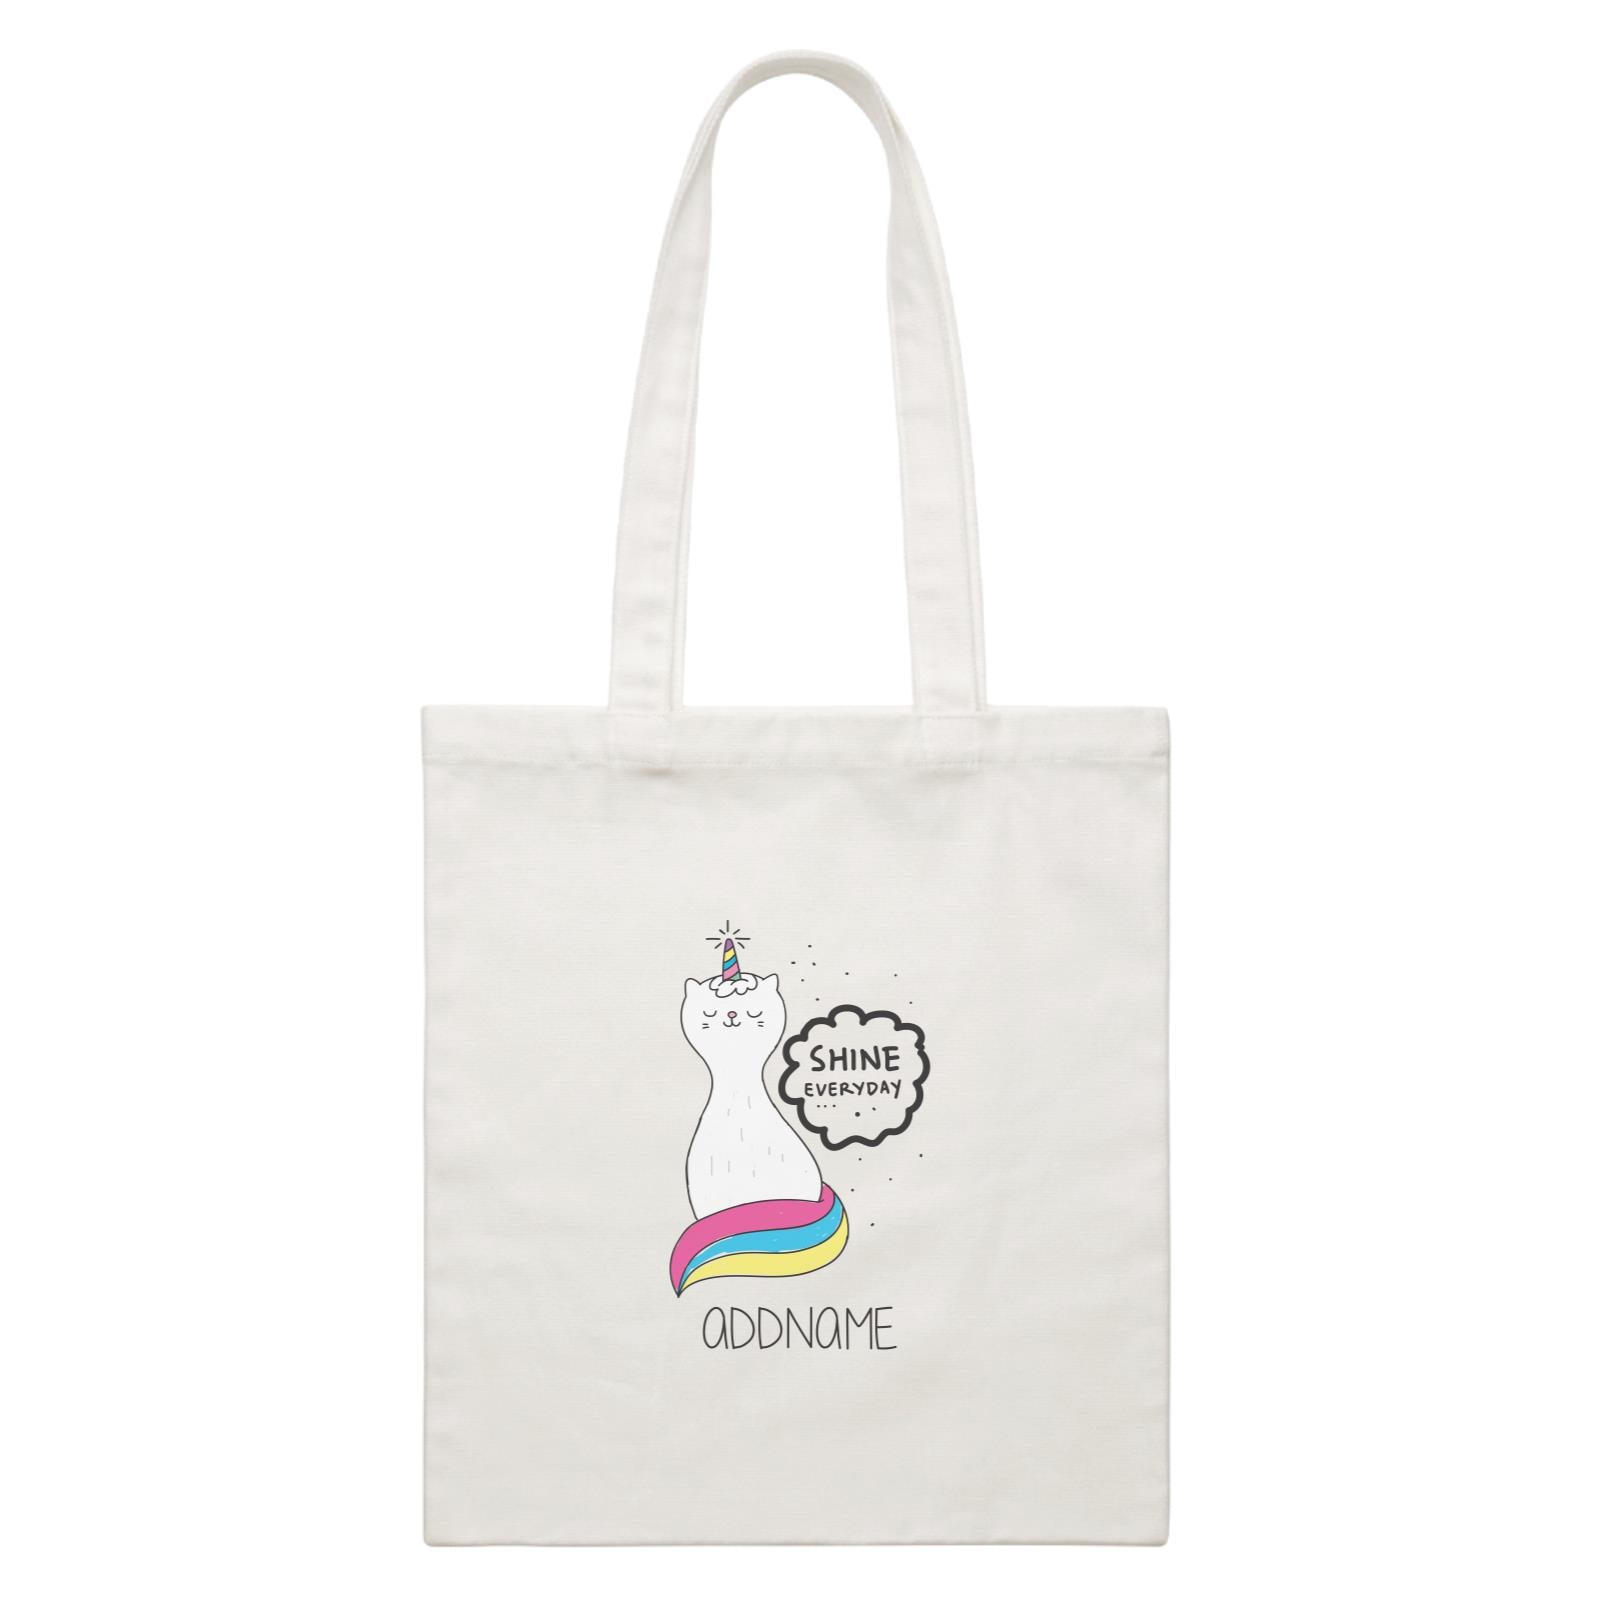 Cool Cute Animals Cats Unicorn Cat Shine Everyday Addname White Canvas Bag